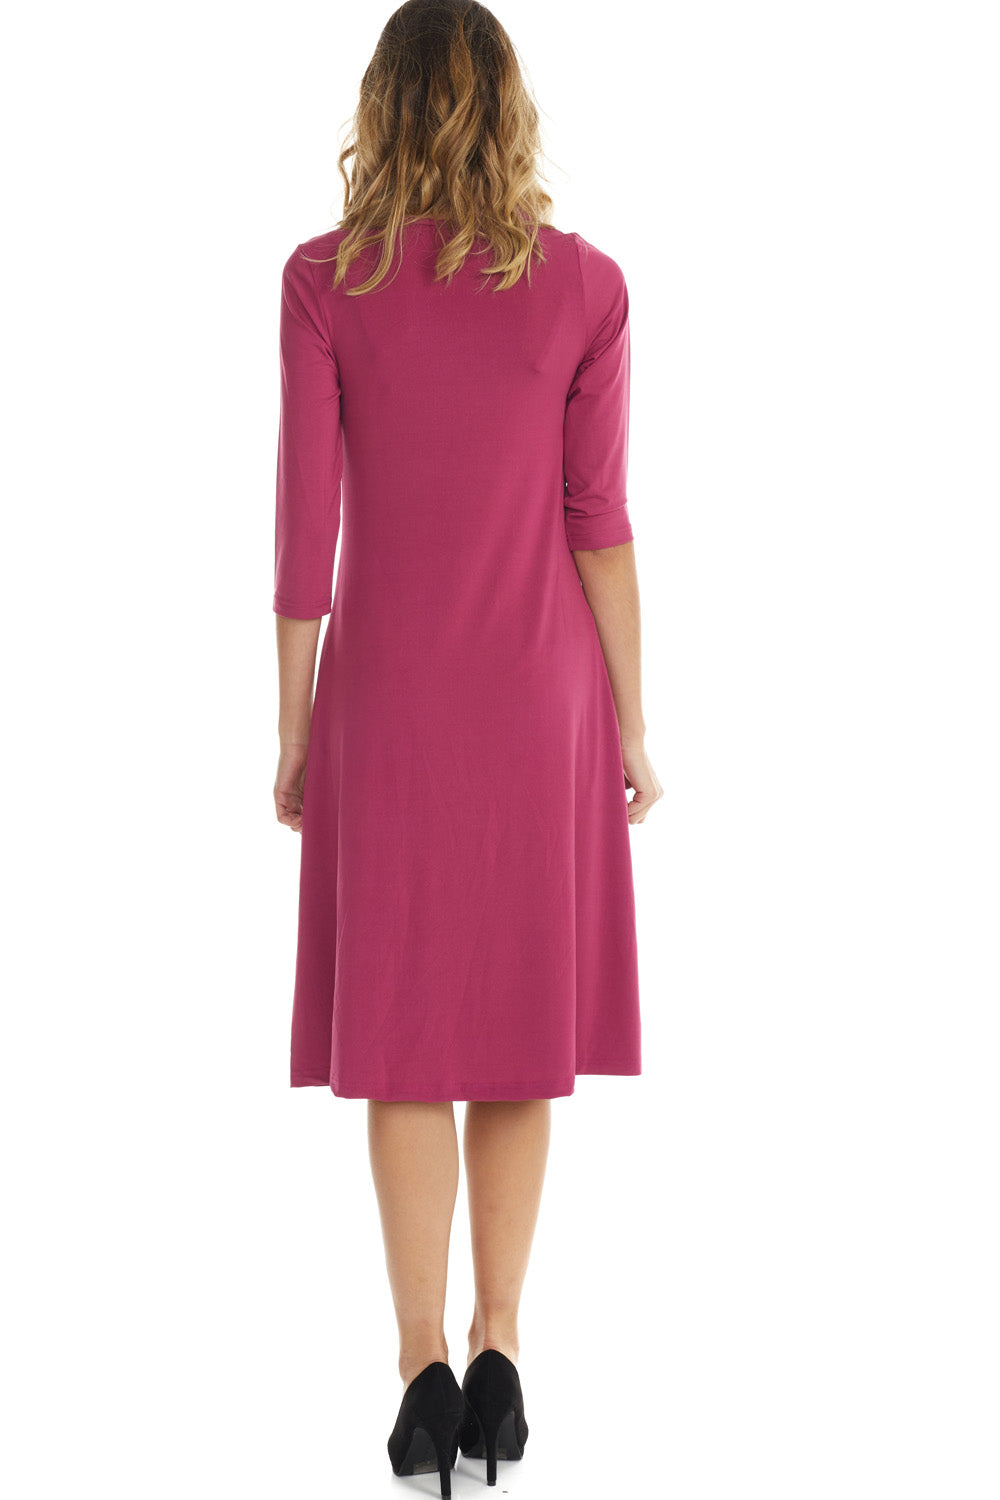 pink flary below knee length 3/4 sleeve crew neck modest tznius a-line dress with pockets big enough for smartphone